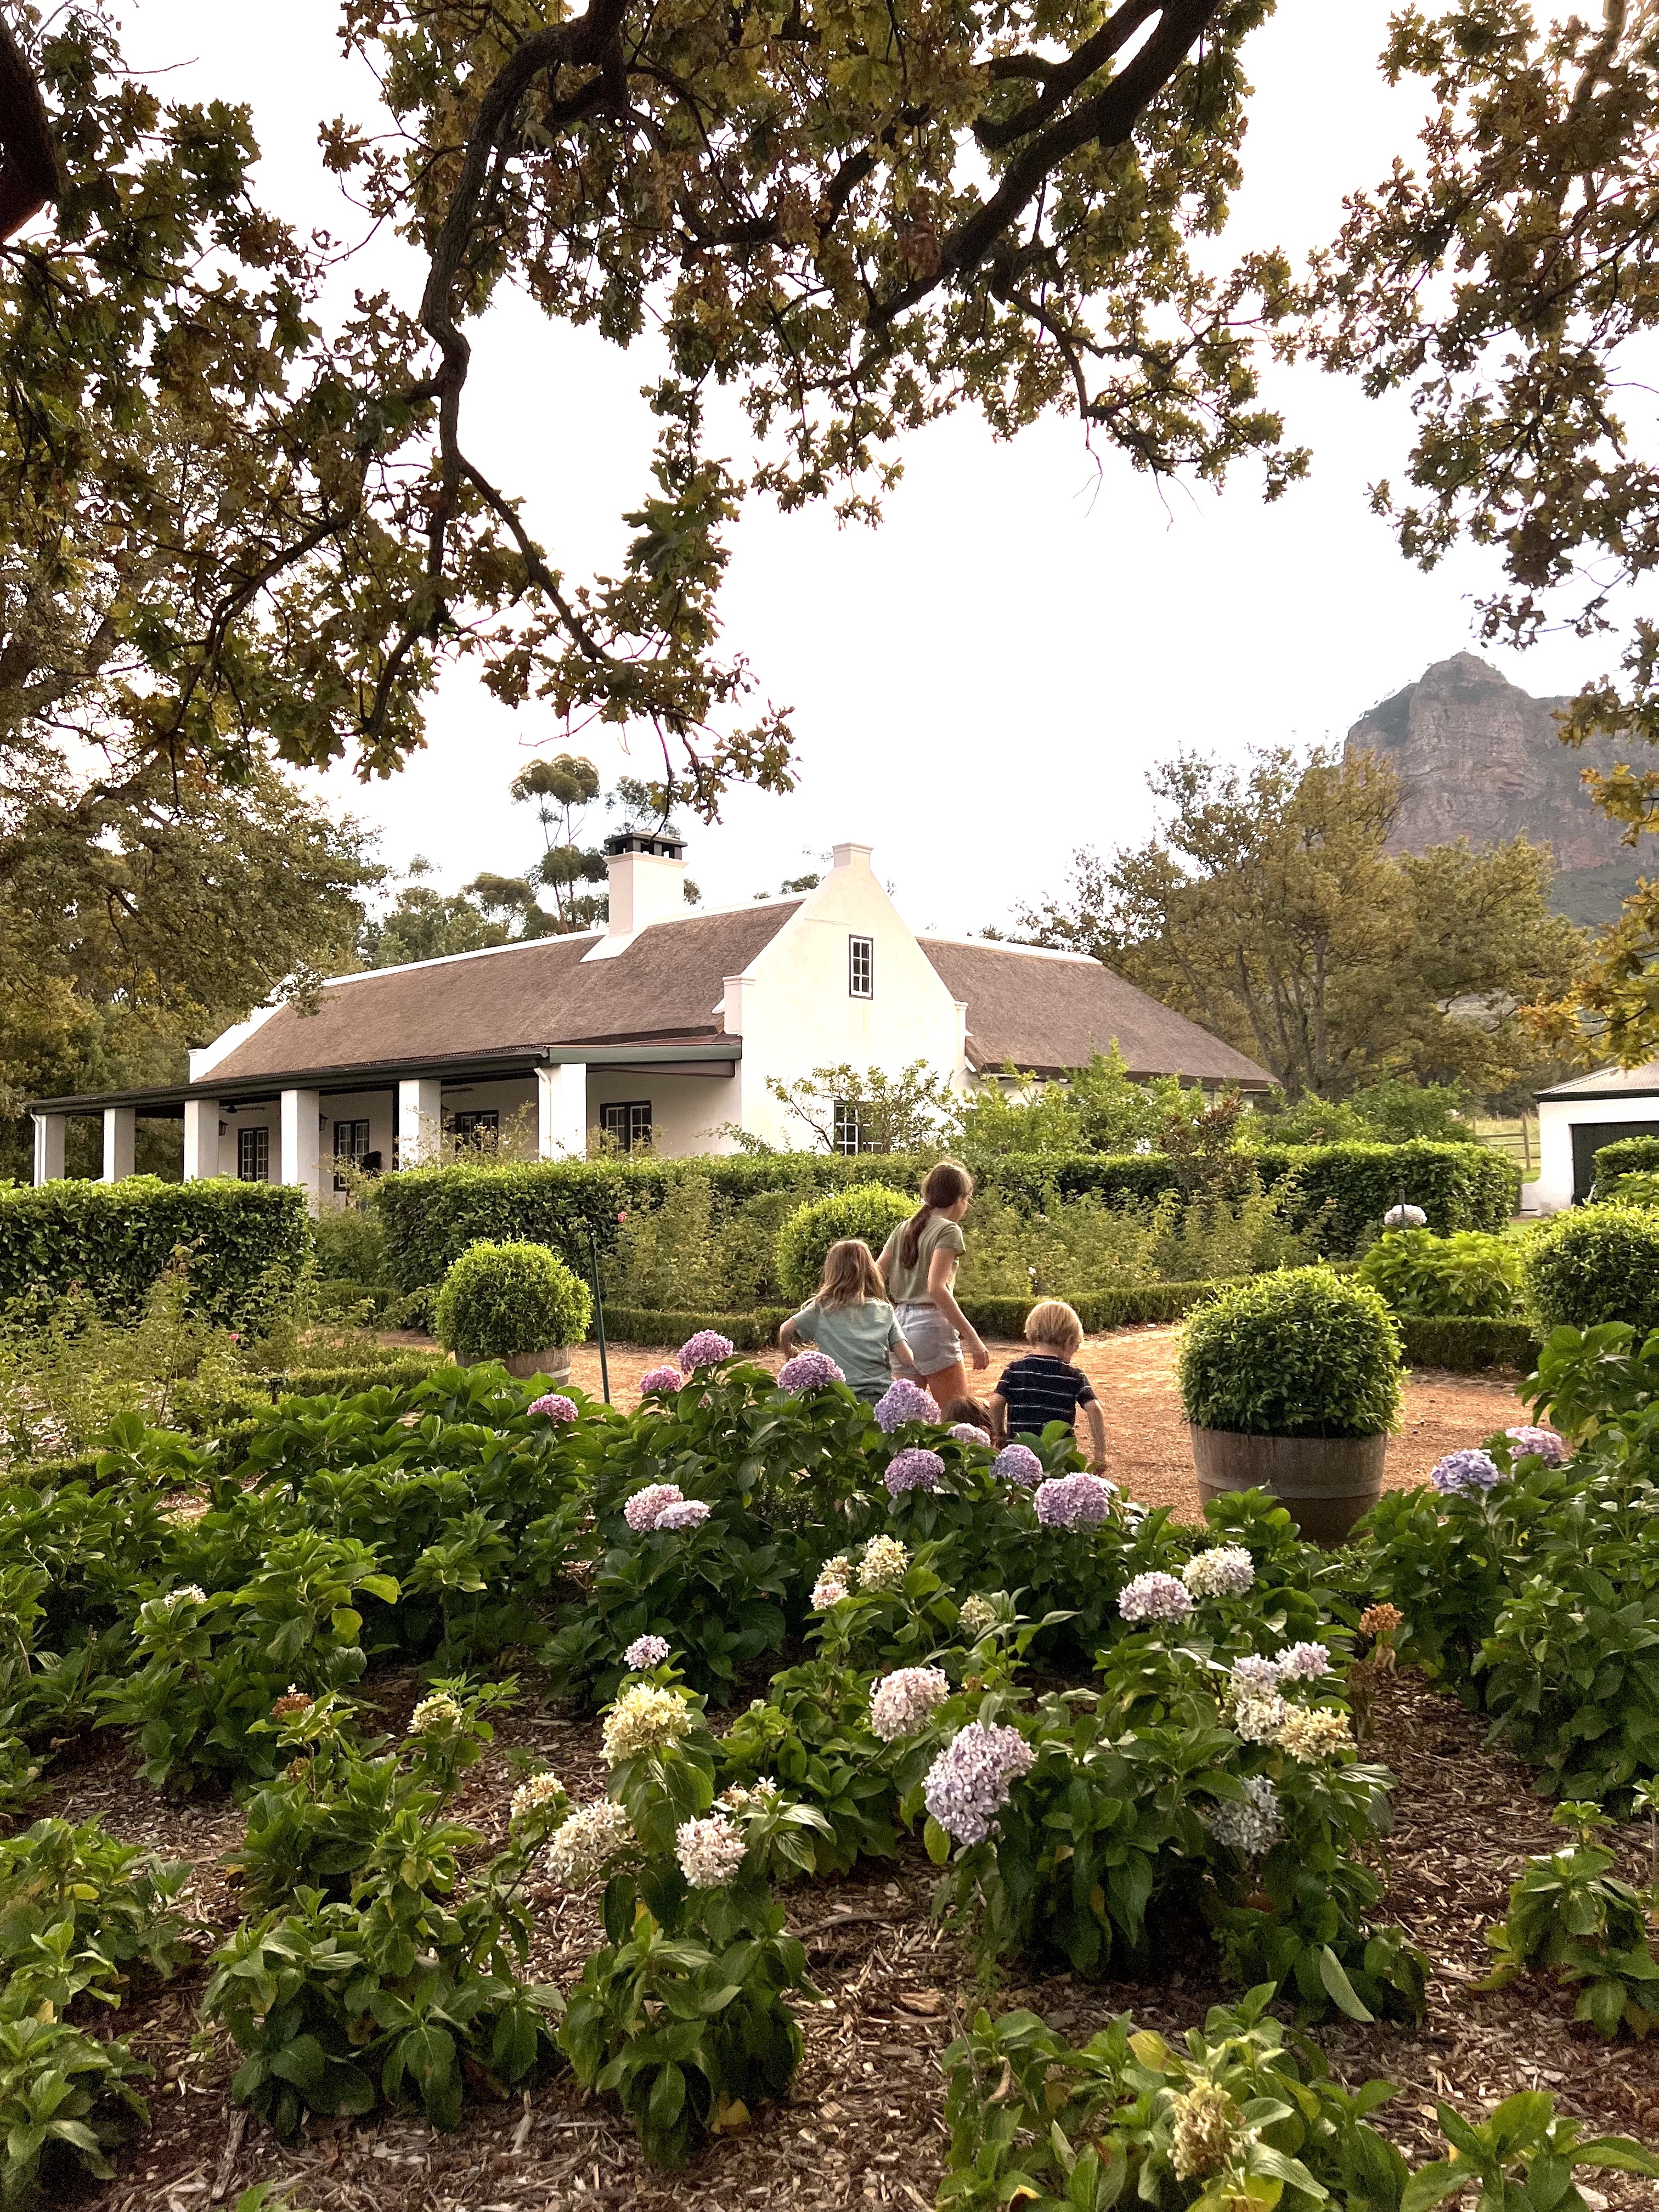 Our children playing Hide & Seek at Cottage 16985, Boschendal